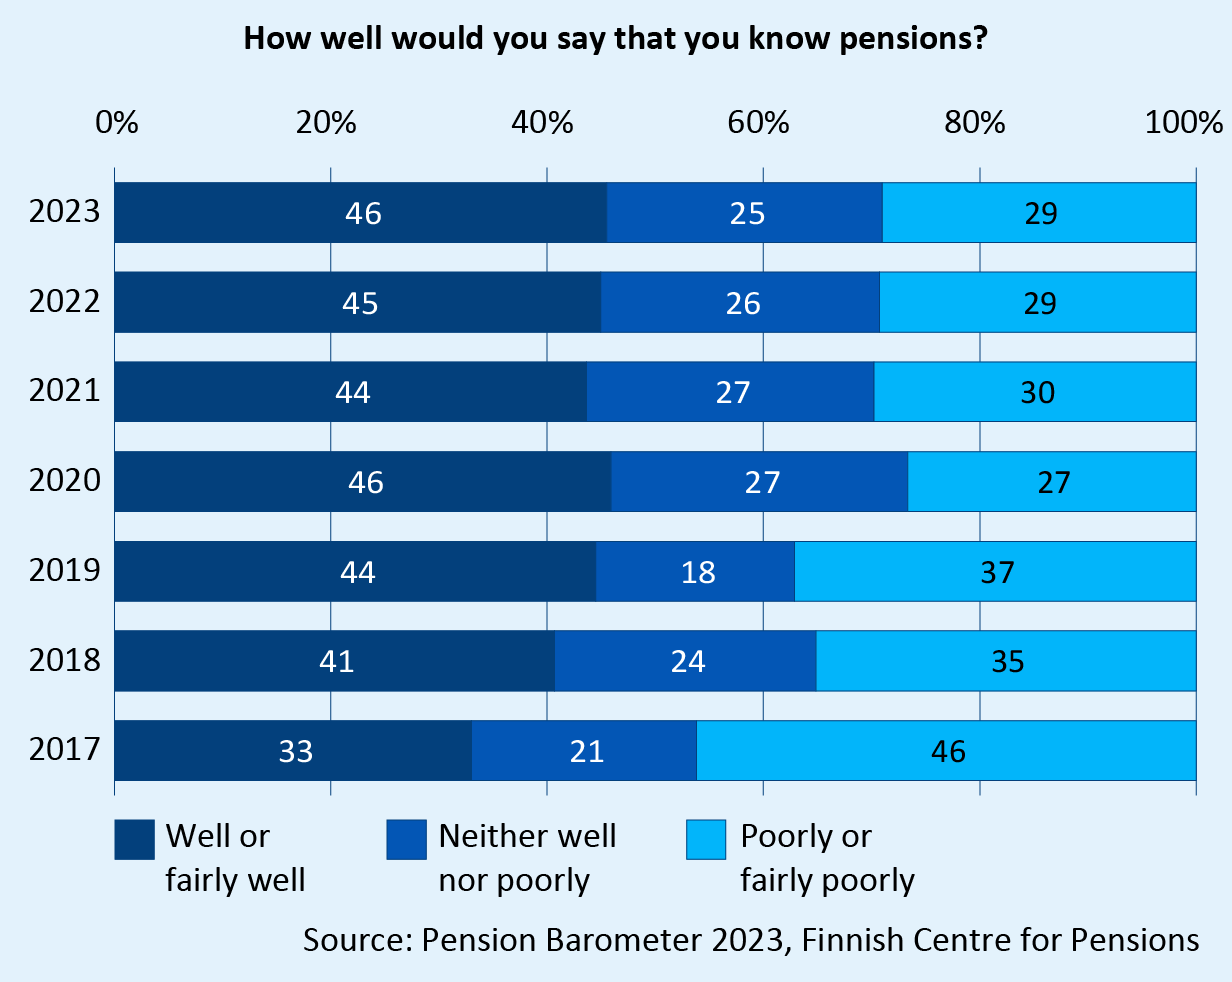 How well would you say that you know pensions? The shares of persons responding “well or fairly well”, “neither well nor poorly” and “poorly or fairly poorly” in 2017–2023. The share of respondents who assess that they know pensions well or fairly well has risen from 33 per cent to 46 per cent. The share of respondents who assess that they know pensions poorly or fairly poorly has dropped from 46 per cent to 29 per cent. Source: Pension Barometer 2023, Finnish Centre for Pensions.